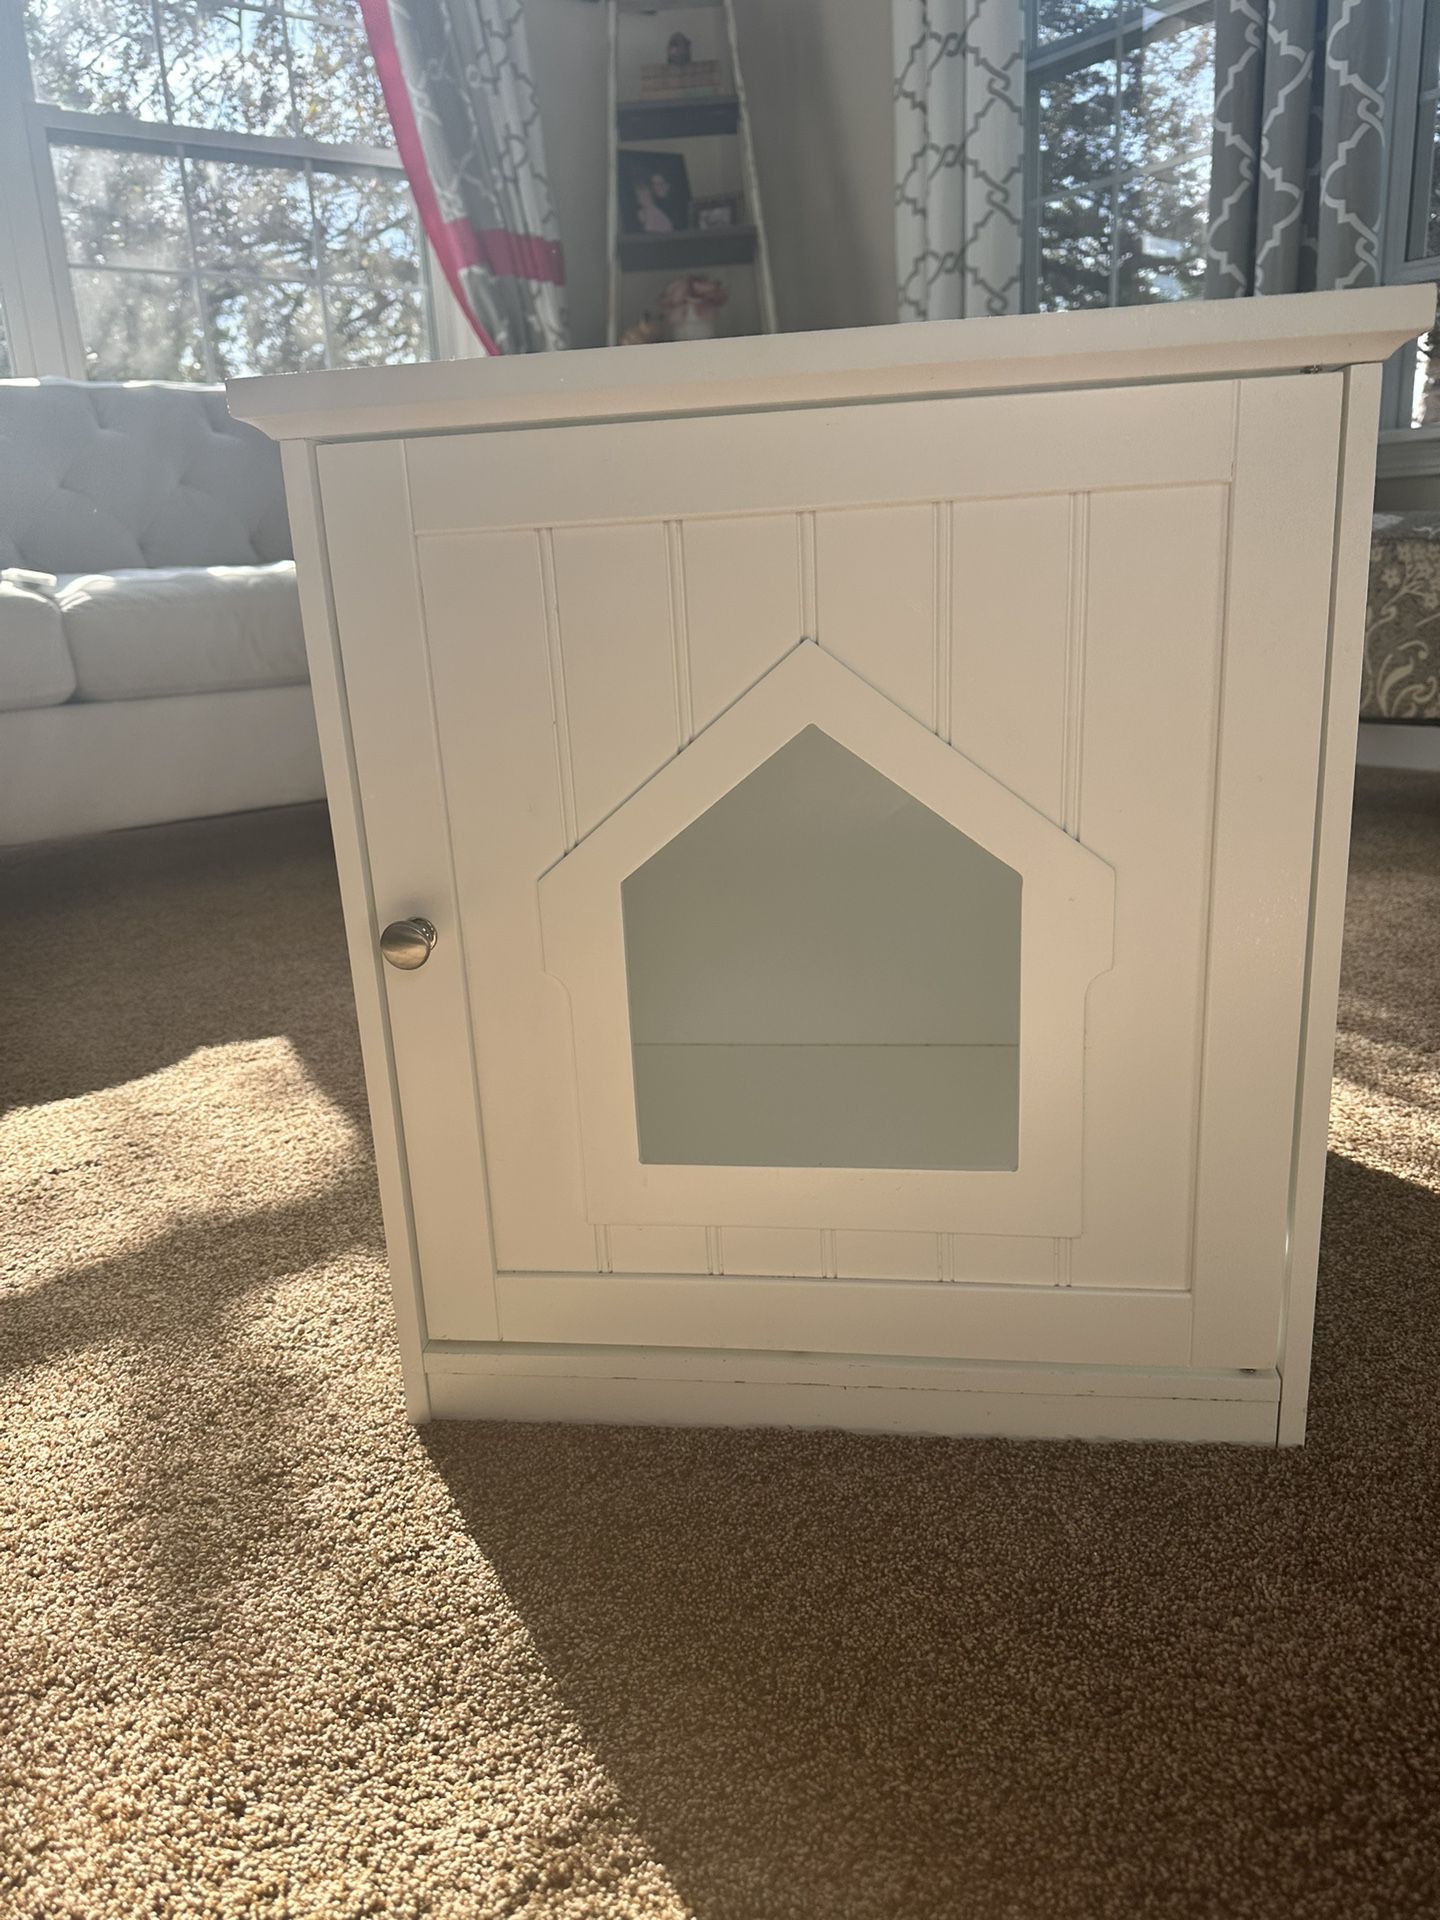 Cat Litter Box/end Table/furniture